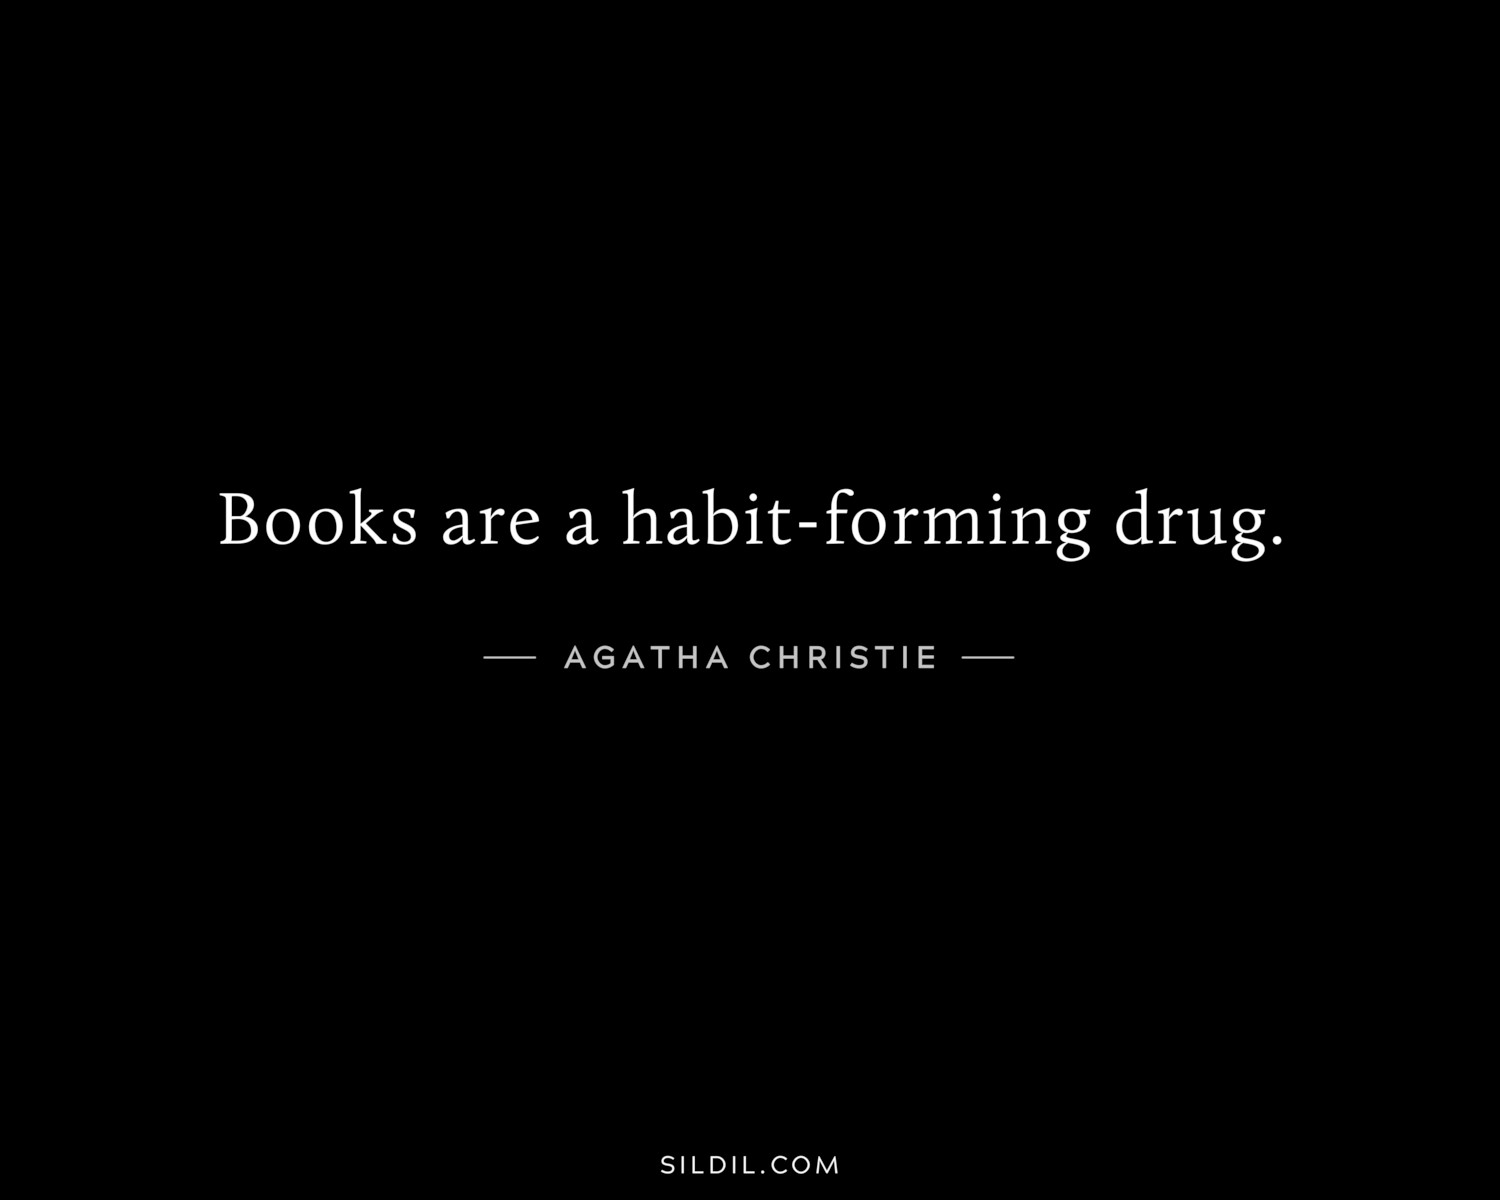 Books are a habit-forming drug.